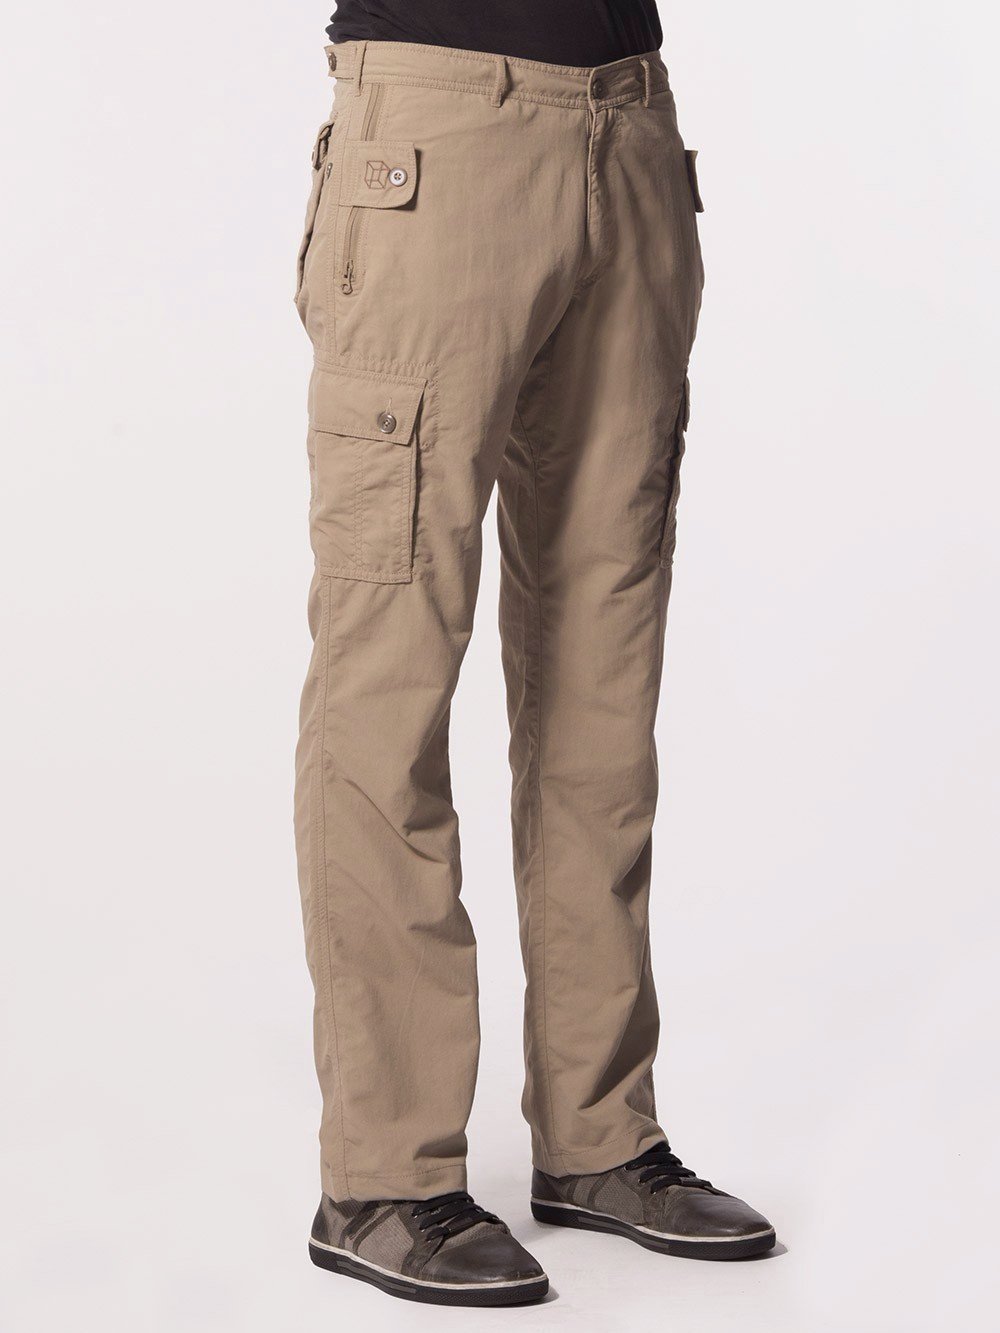 Bulkbuy Customized Fashion Outdoor Casual Long Cargo Pants with Many  Pockets Men Trousers price comparison